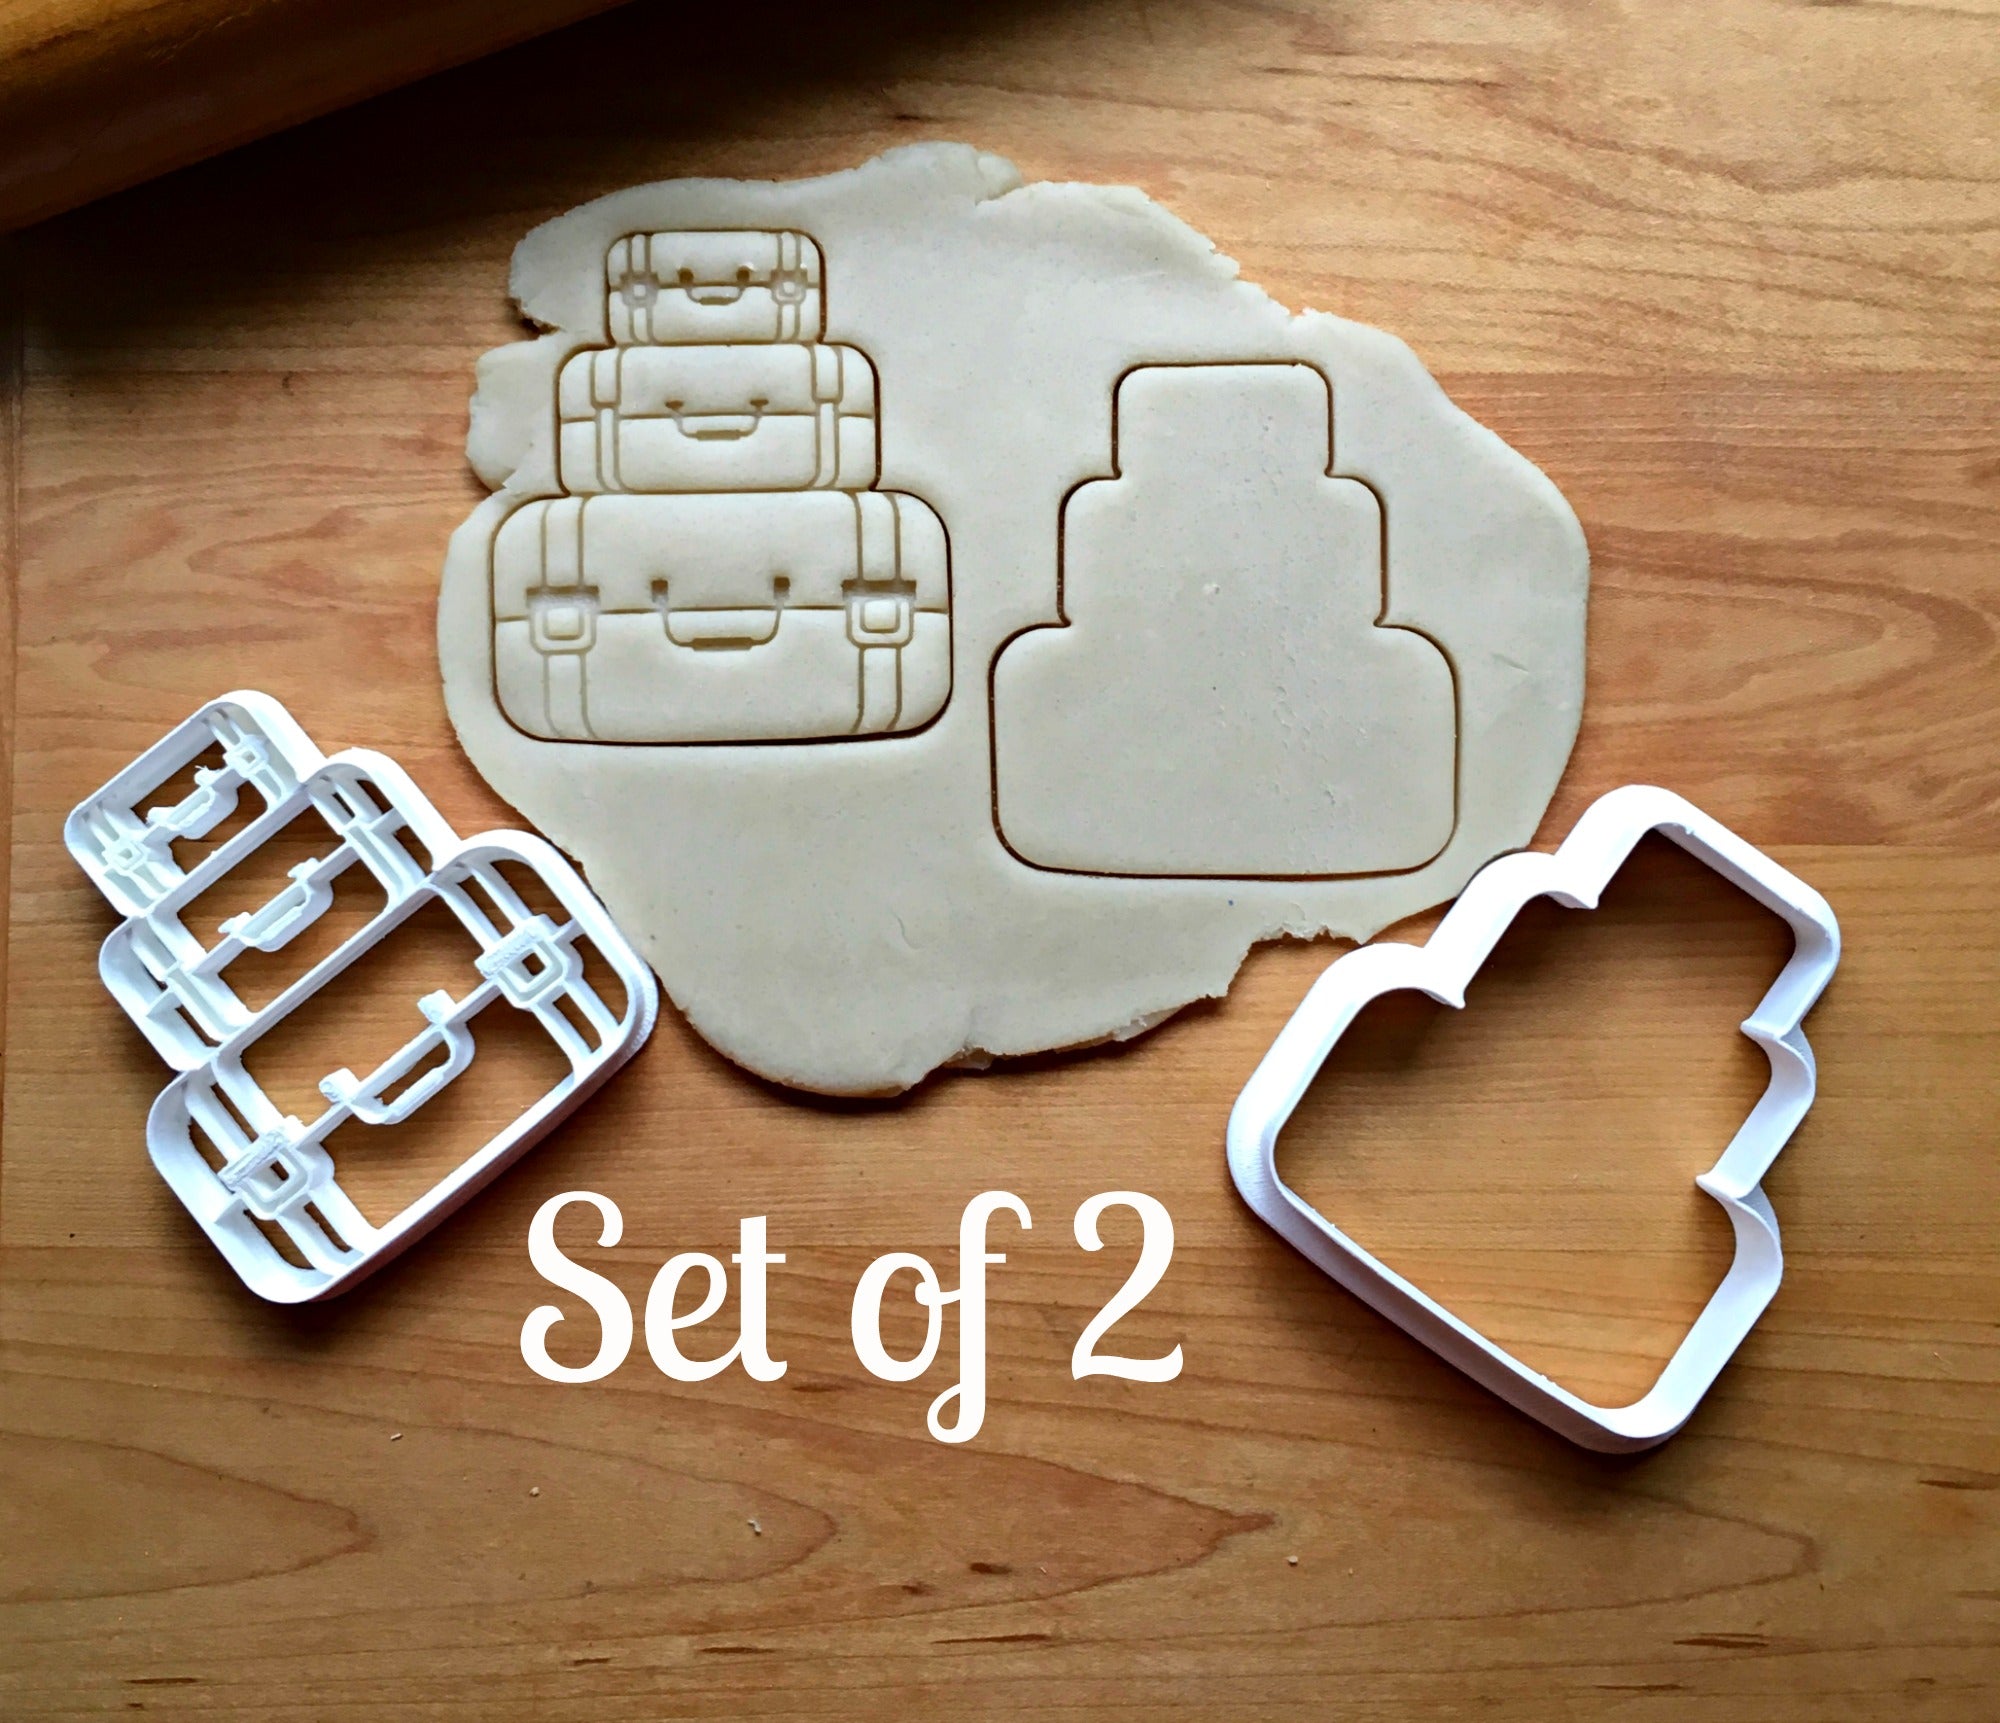 Set of 2 Luggage Cookie Cutters/Dishwasher Safe